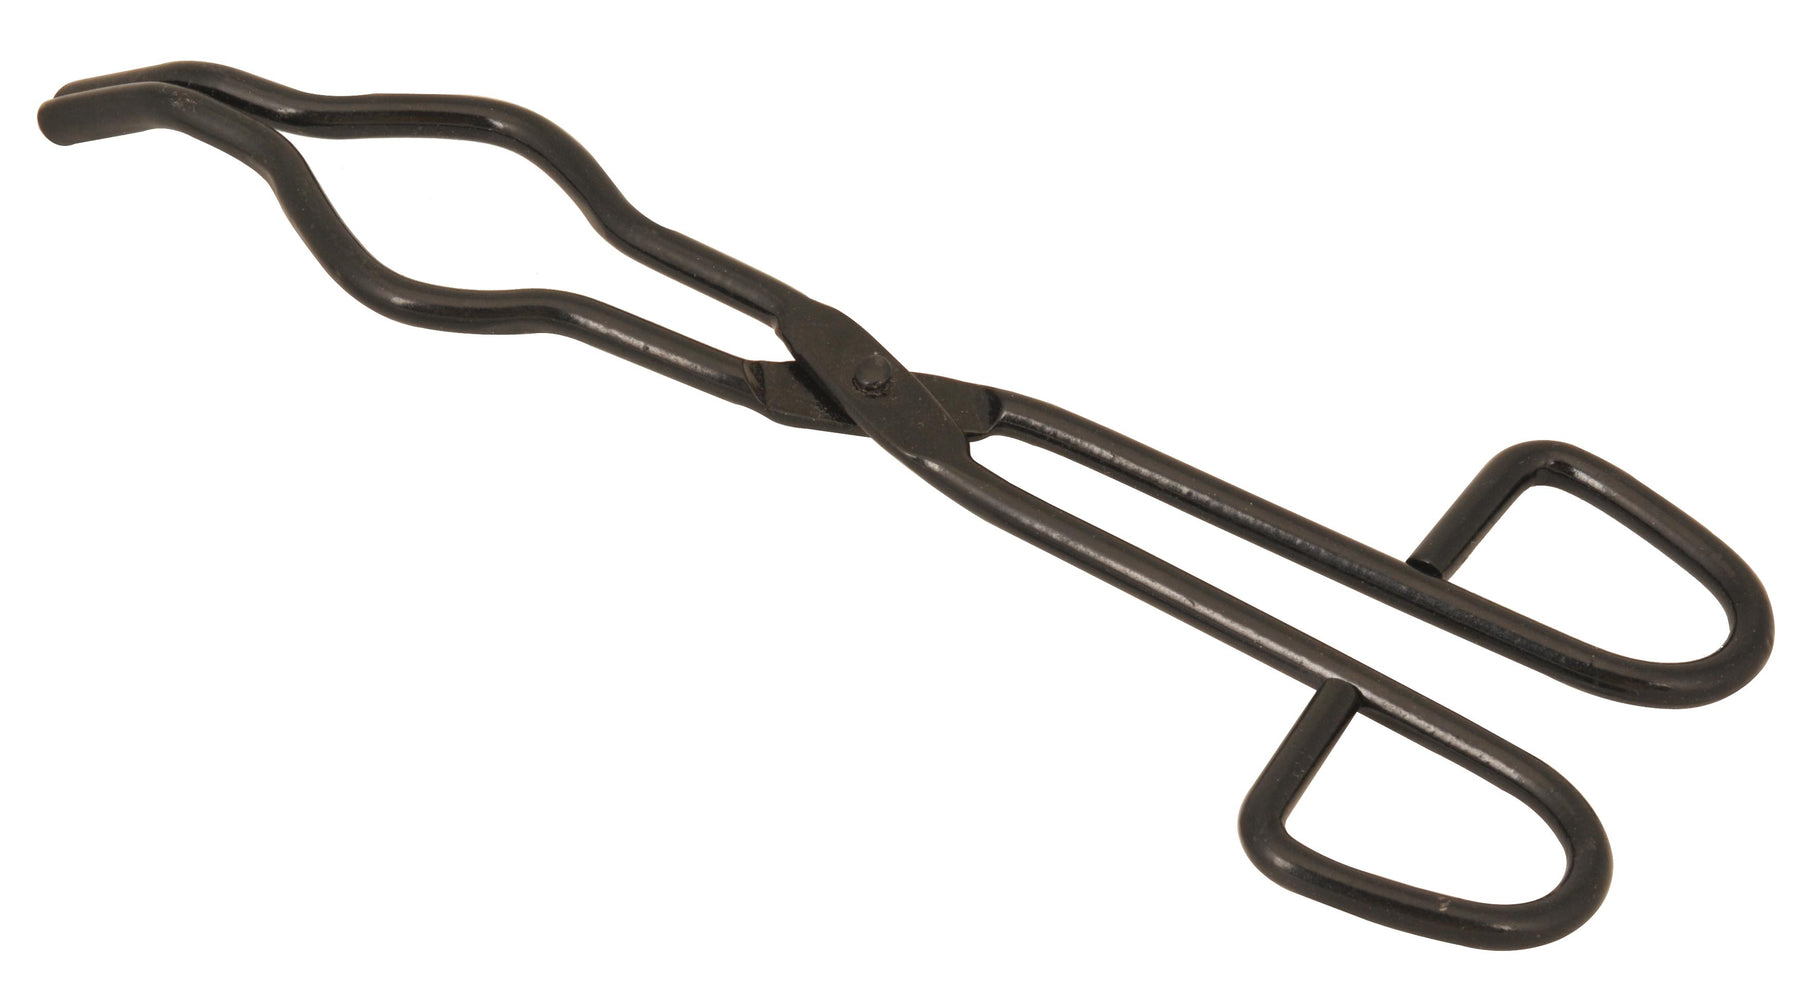 Crucible Tongs, with Bow - 3.5" Capacity - Flat Ends - Blackened Stainless Steel